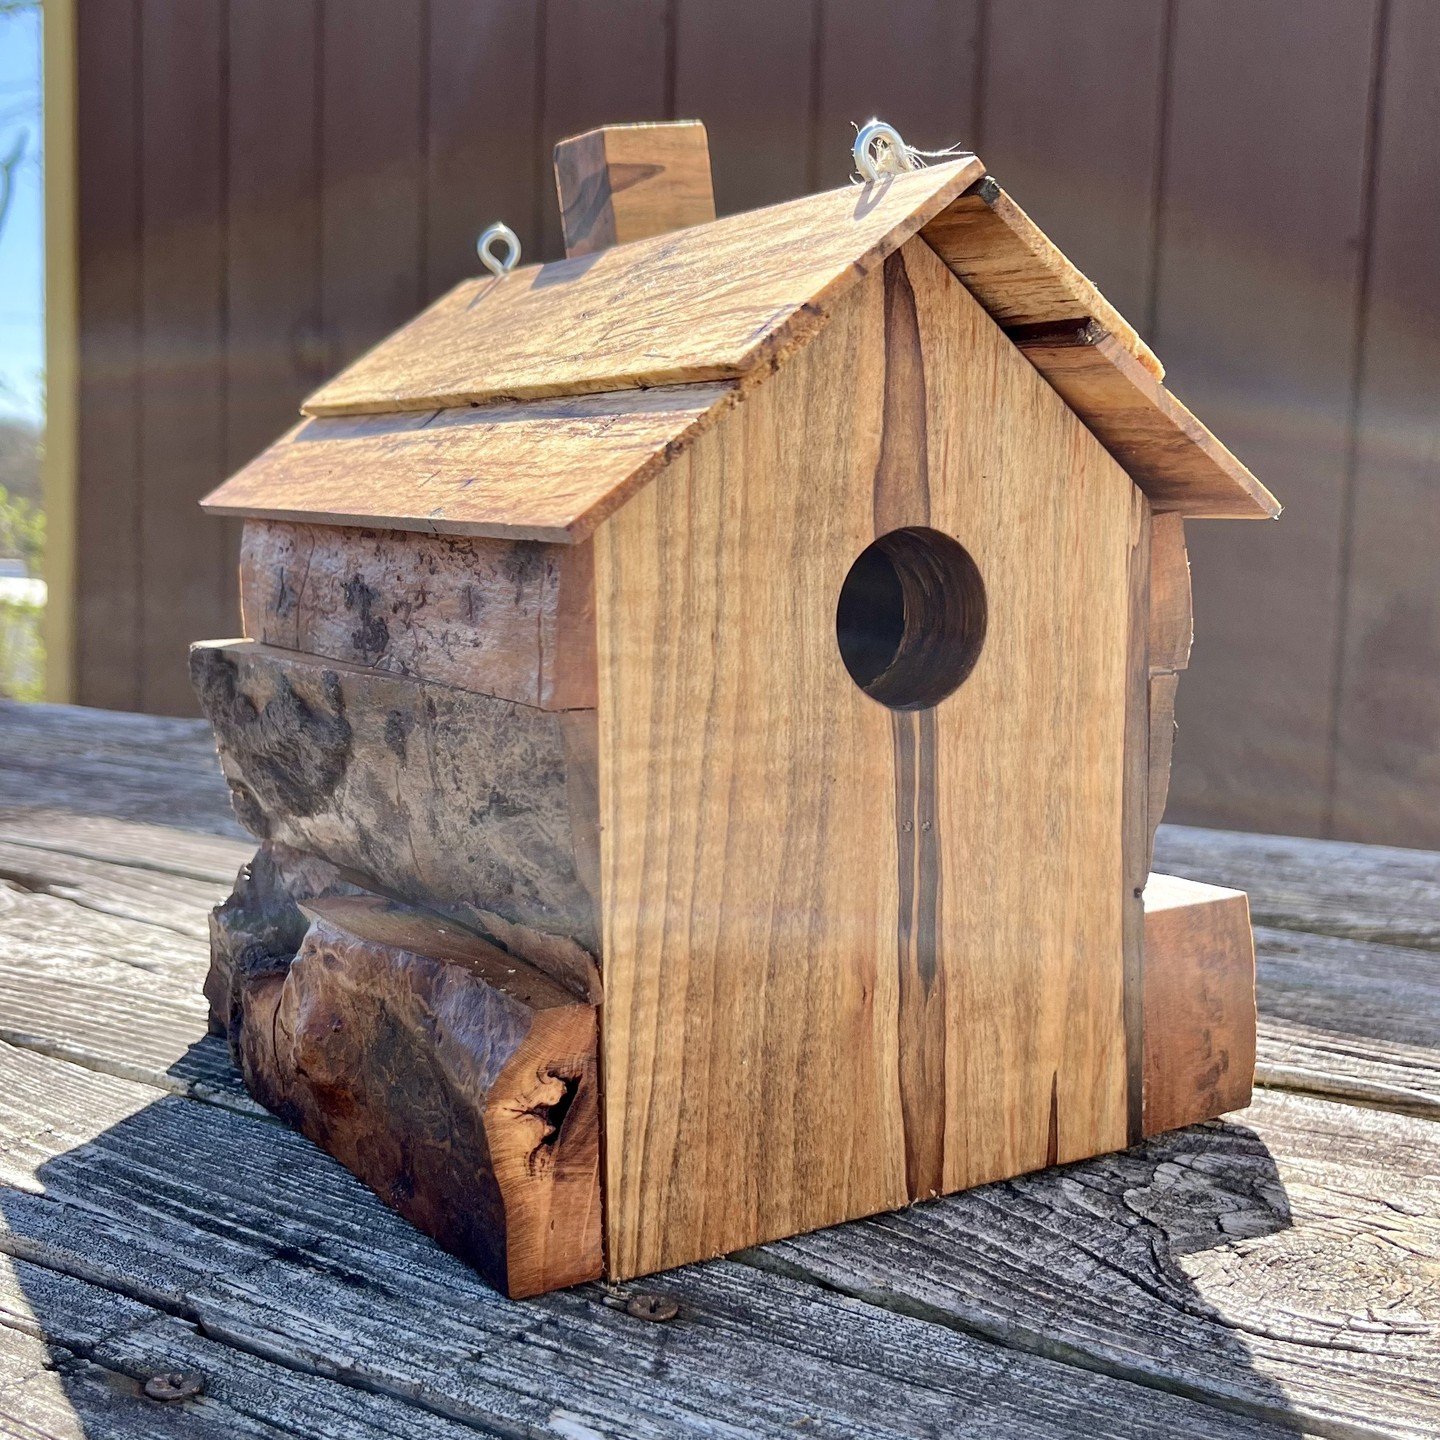 These beautiful, locally-made, handcrafted bird houses are getting us in the spring mood. 🌷

These make wonderful gifts for the bird lover in you life! Stop by this weekend and grab yours. 

Thur-Sat | 10am&ndash;5pm
Sun | 10am&ndash;3pm

https://po